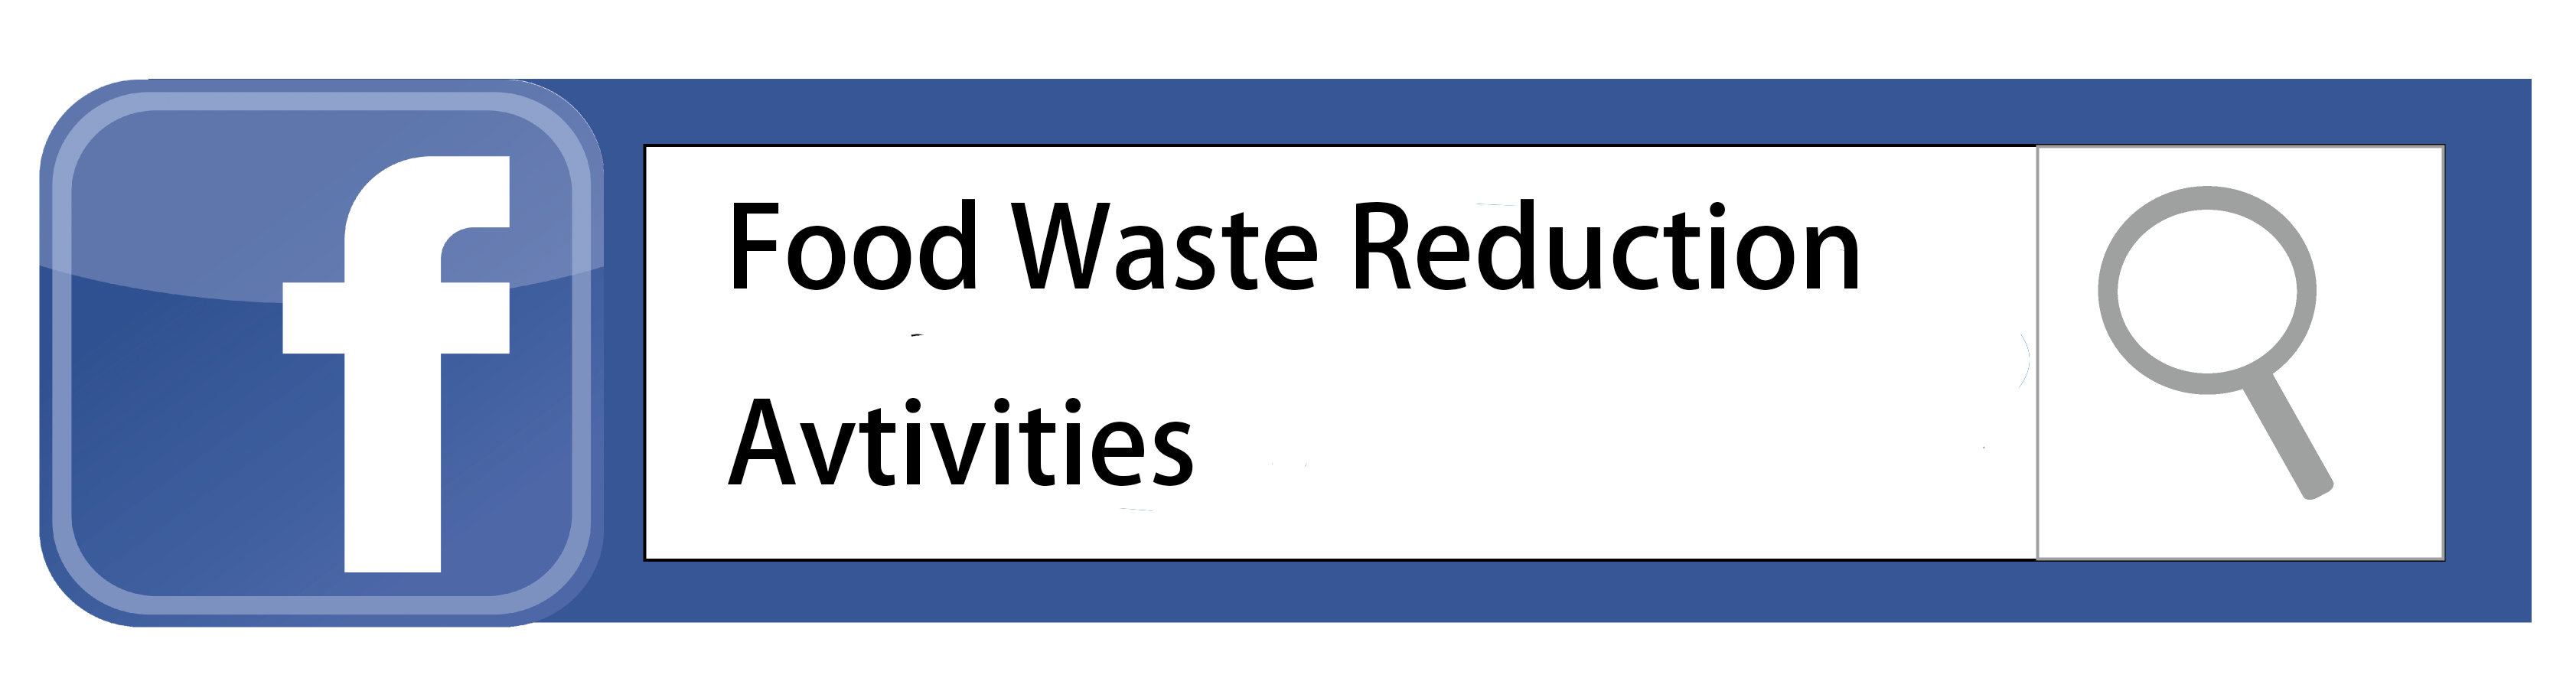 Facebook of Food Waste Reduction 

Activities